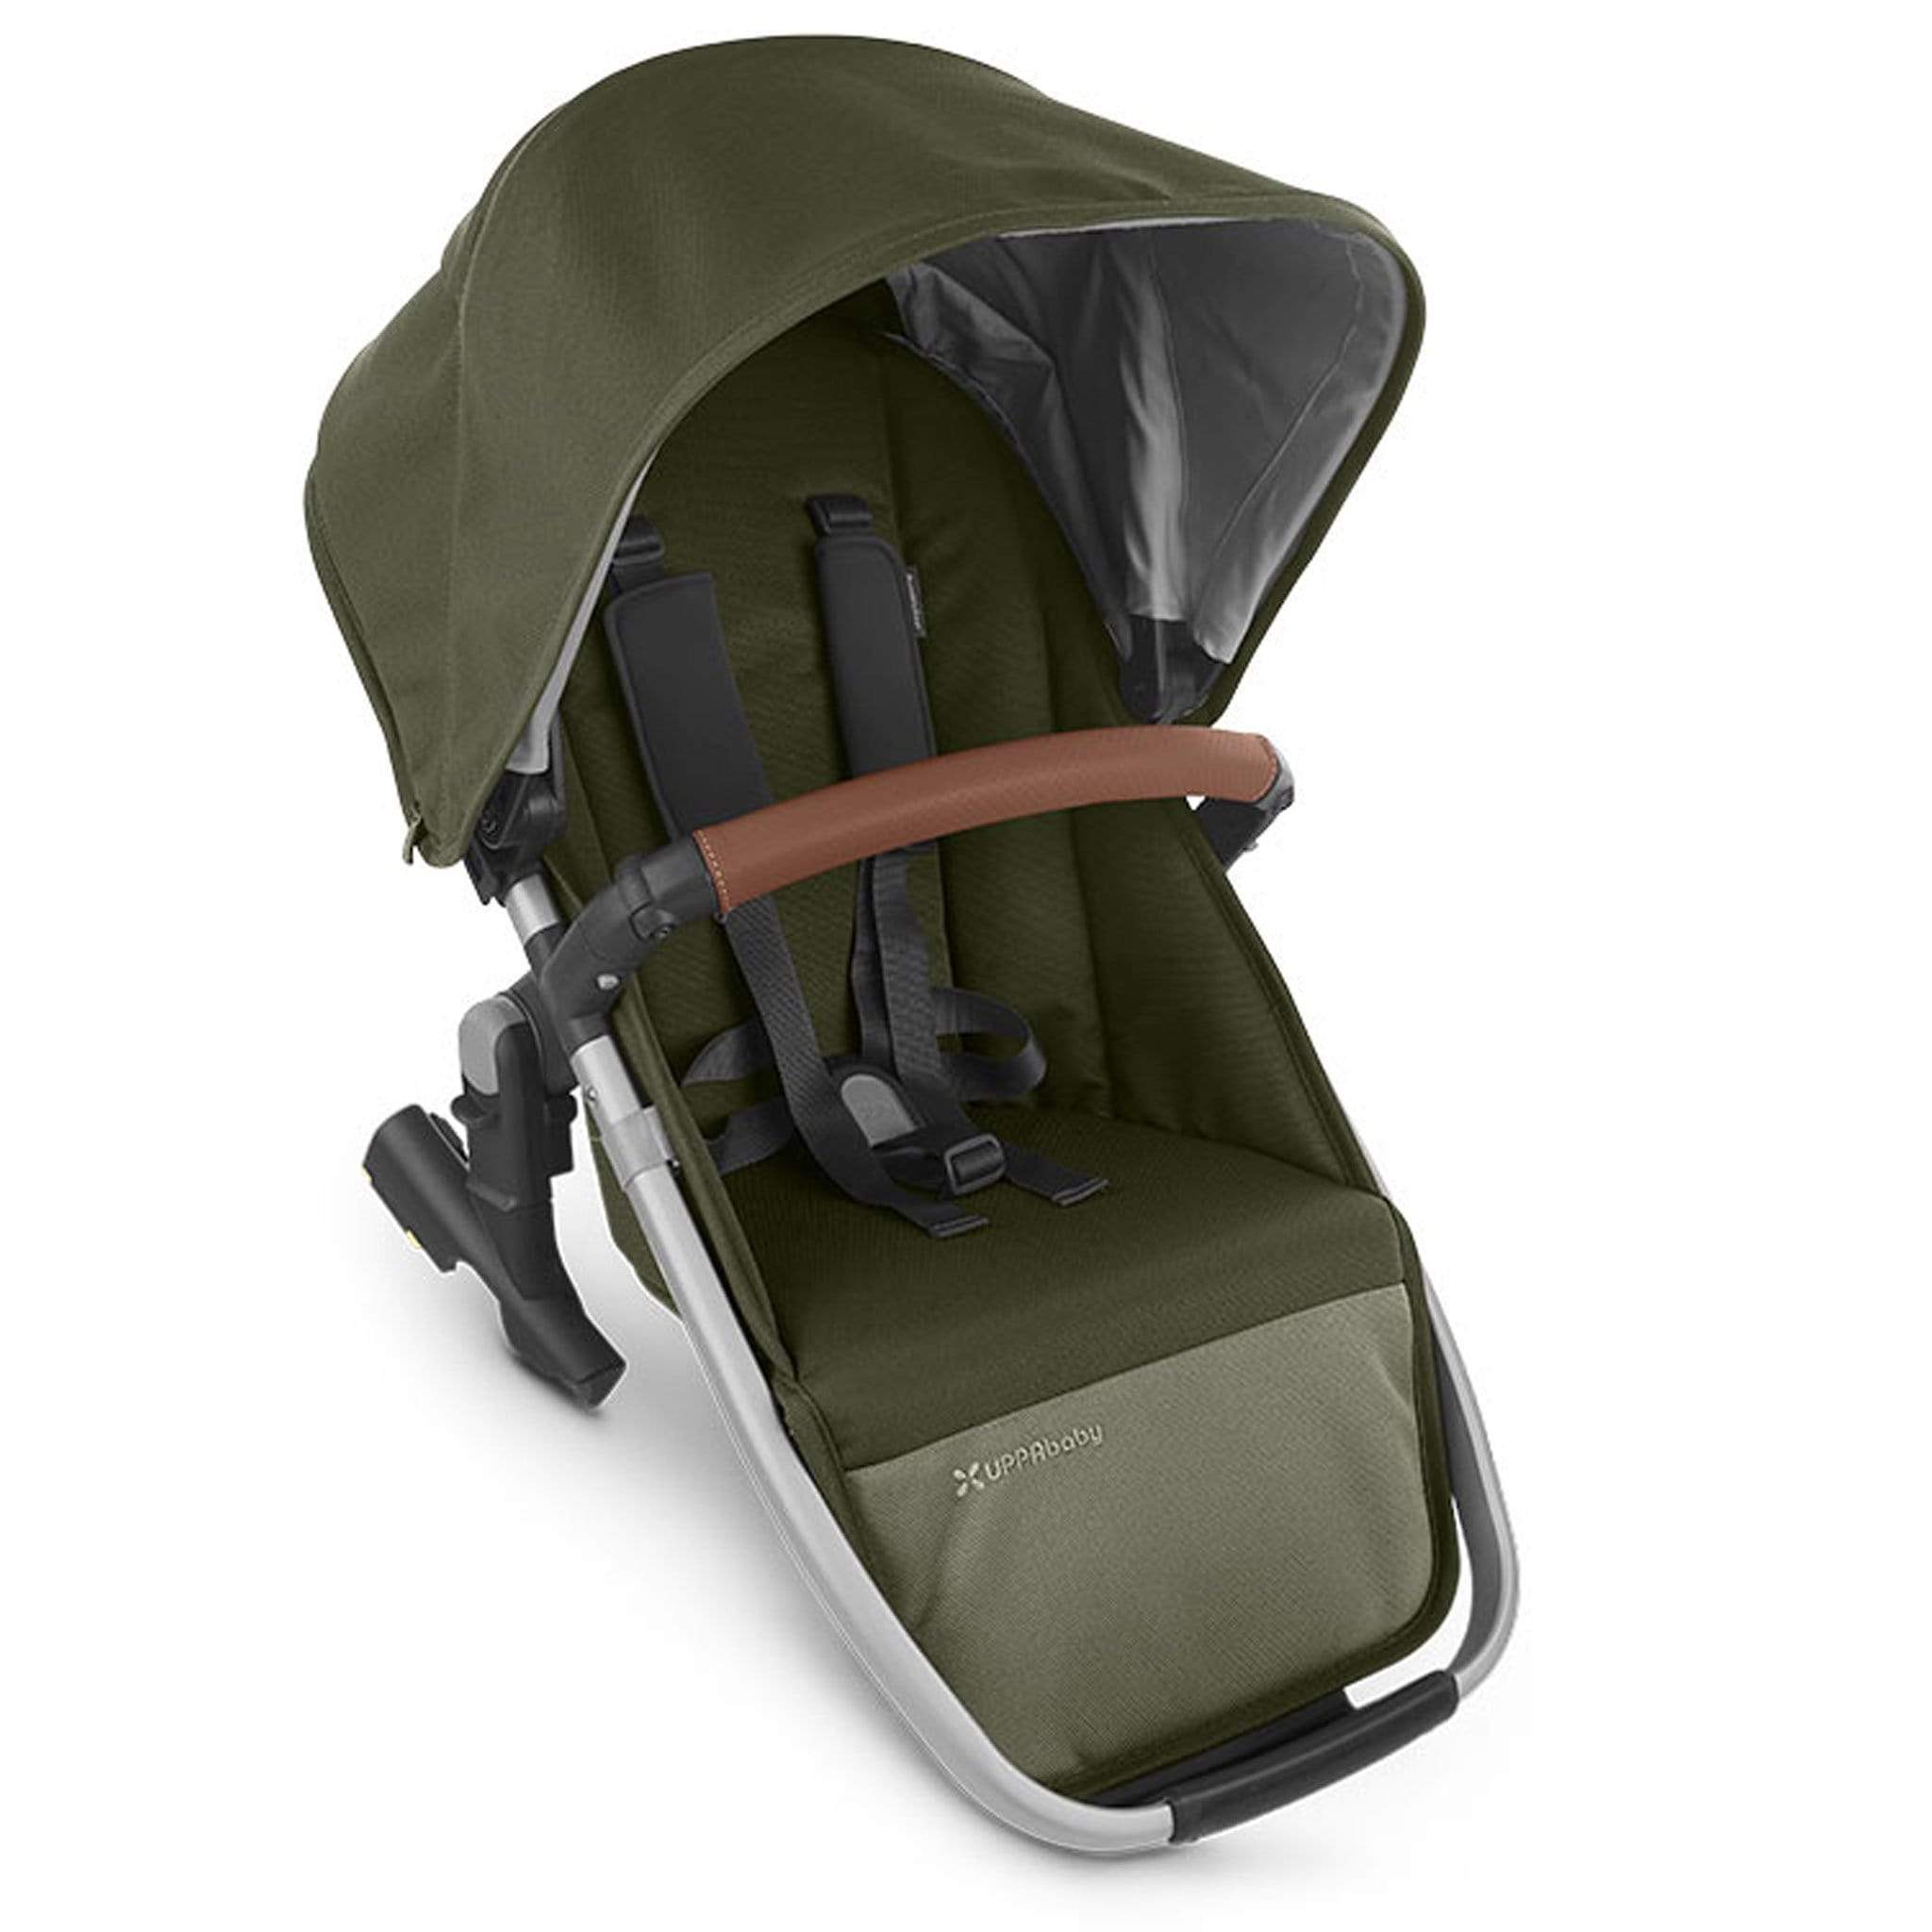 Uppababy buggy accessories UPPAbaby Vista Rumble Seat Hazel